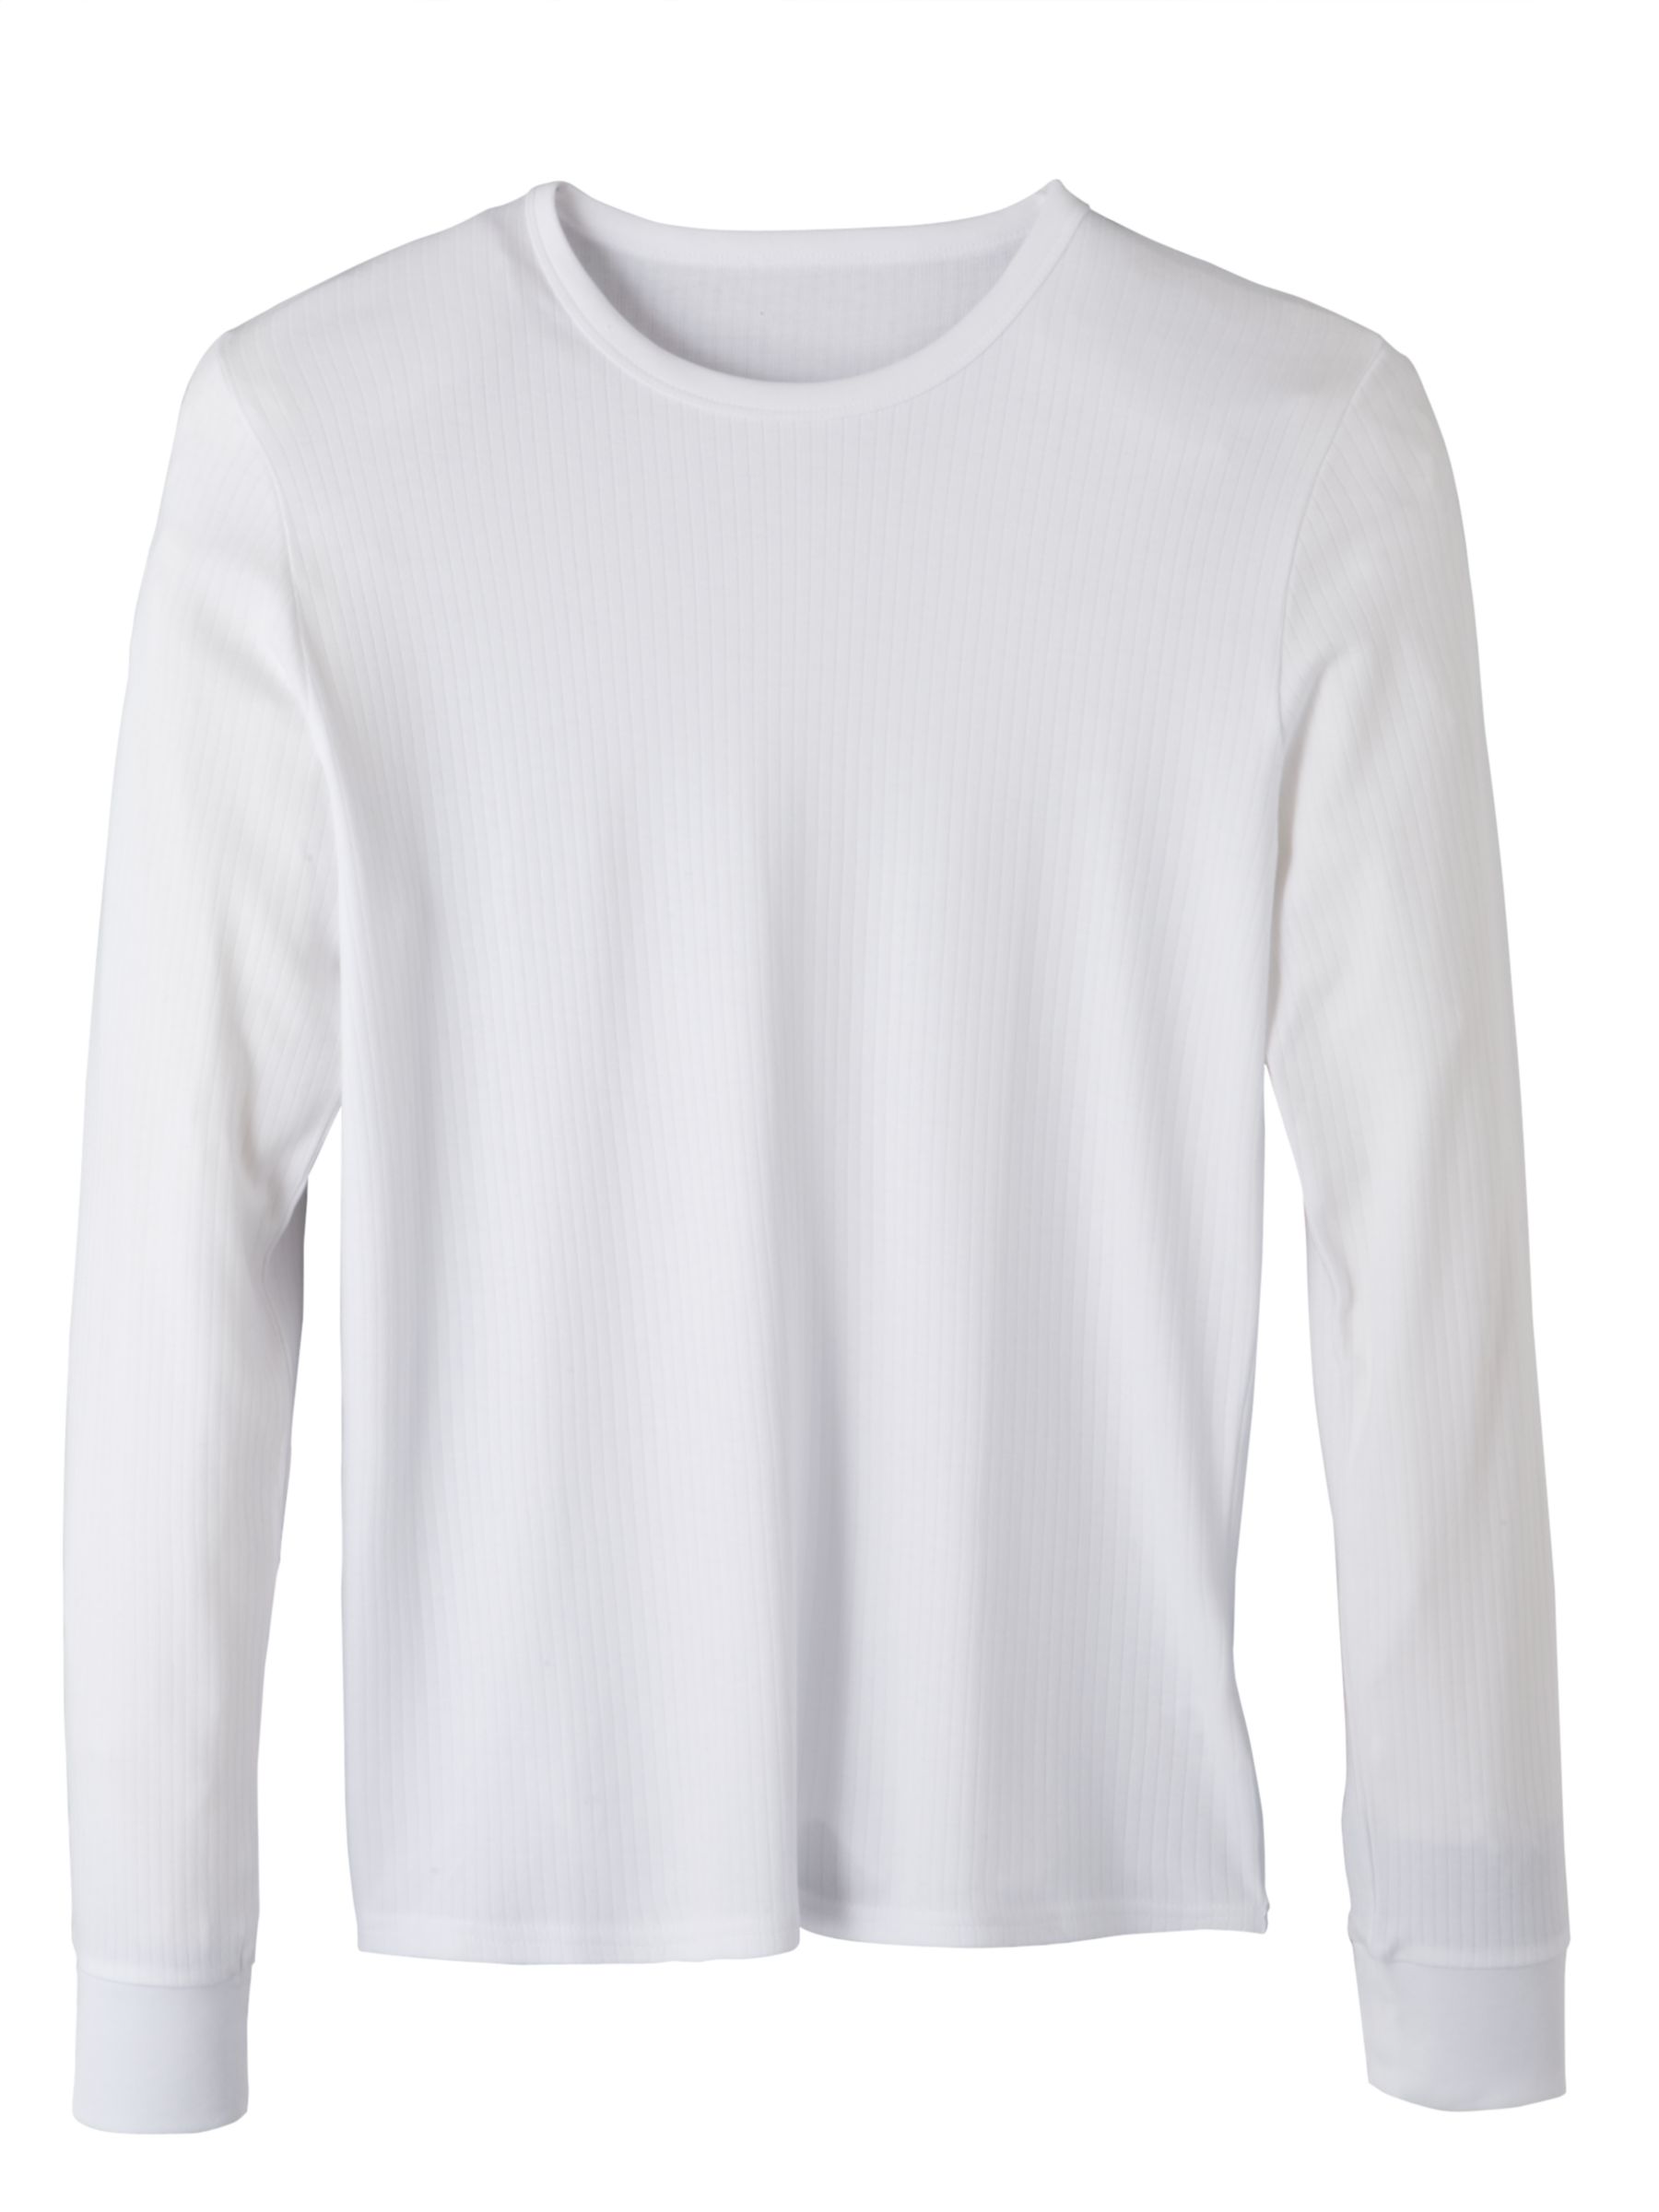 Long Sleeve Thermal T-Shirt, White